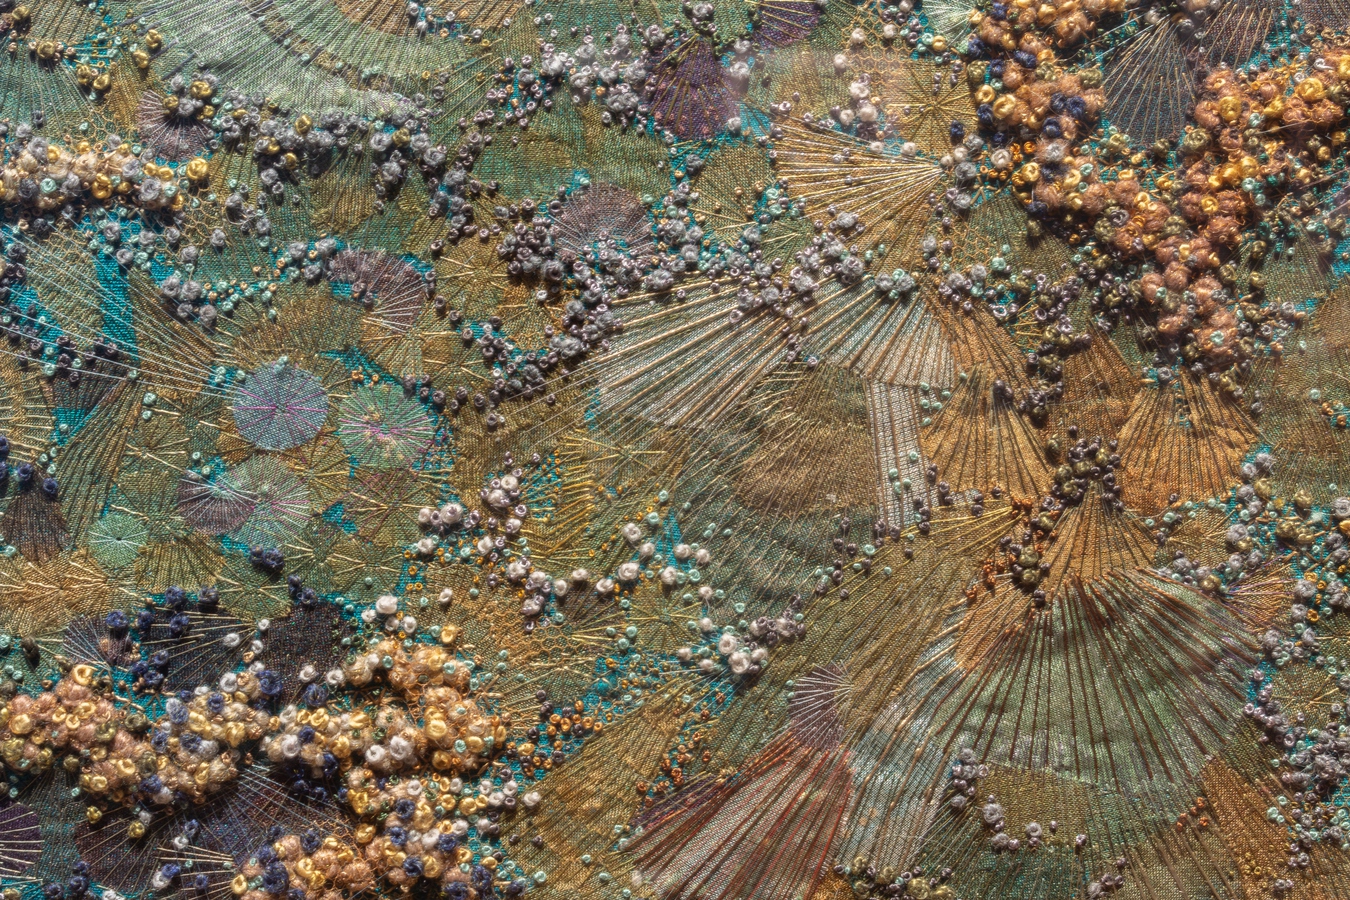 Image: Carol Ann Bauer, Fossil Shells (detail). Stitching fabric. Photo by Lindsey de Roos.